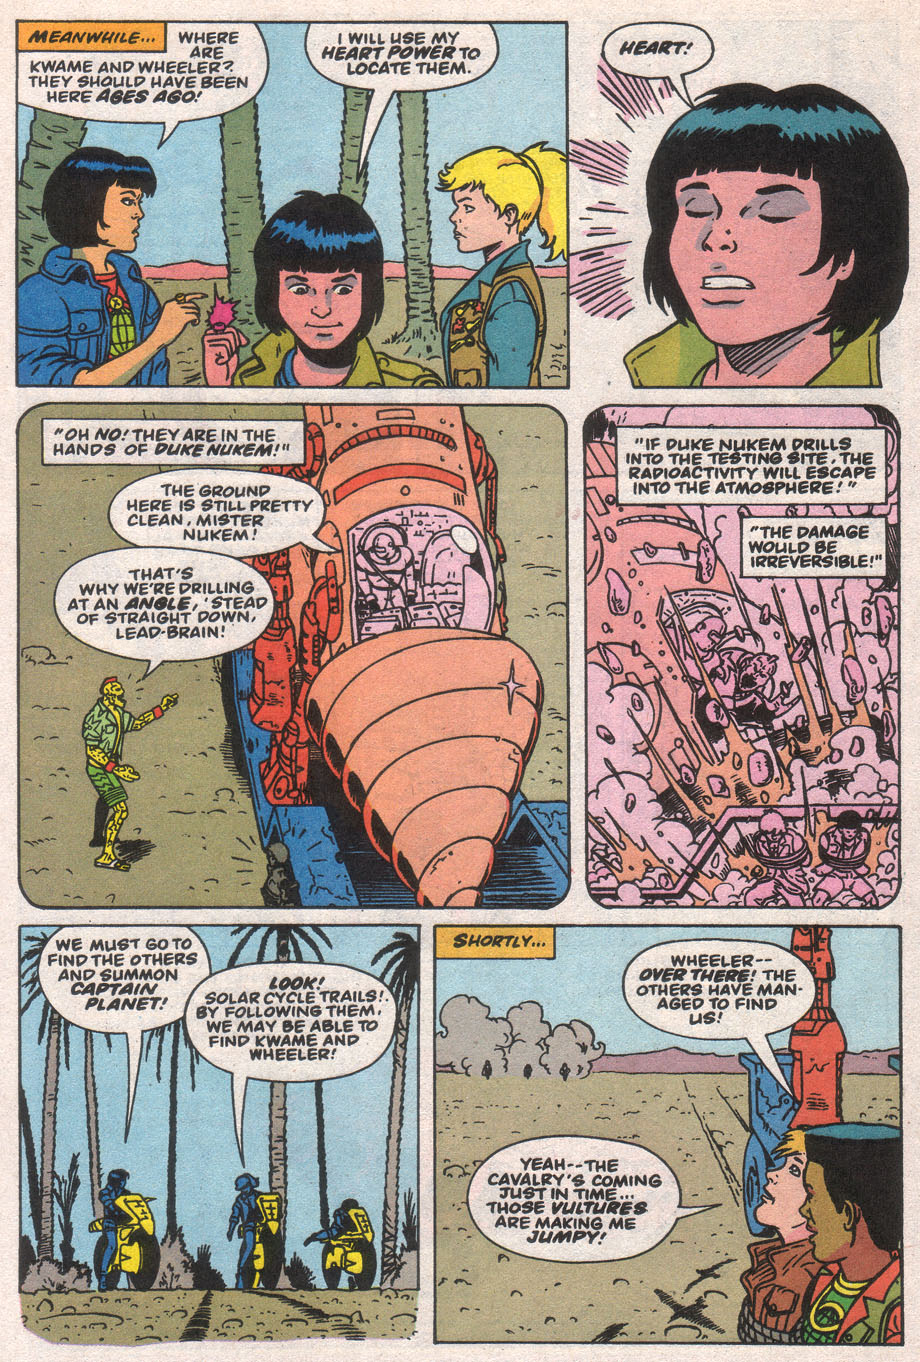 Captain Planet and the Planeteers 11 Page 28